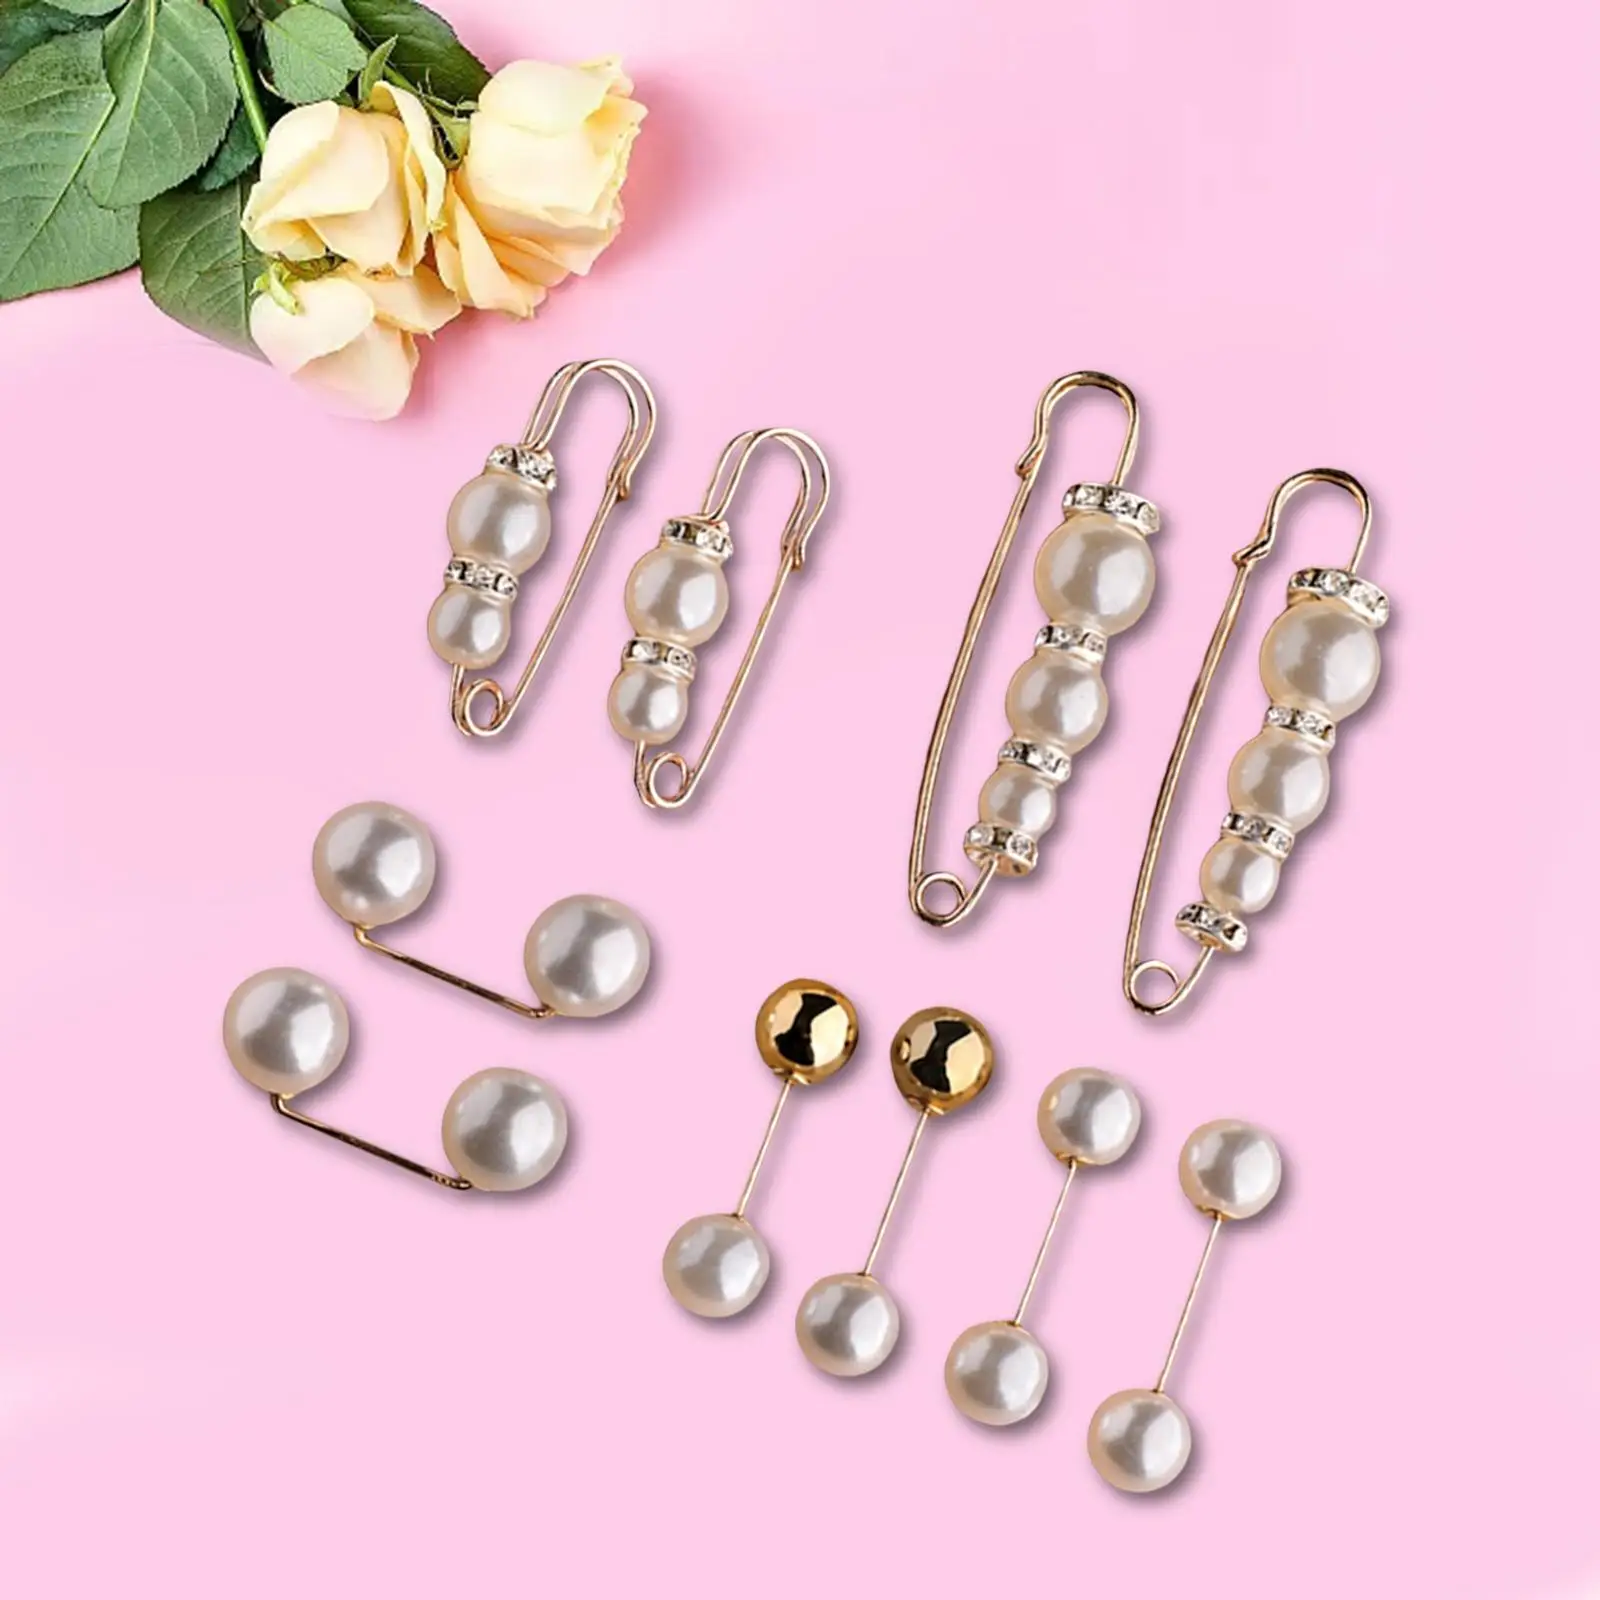 10Pcs Women Brooch Pins Shawl Clips Waist Pins Anti Exposure Costume Accessory for Shirt Clothing Dress Cardigan Wedding Party